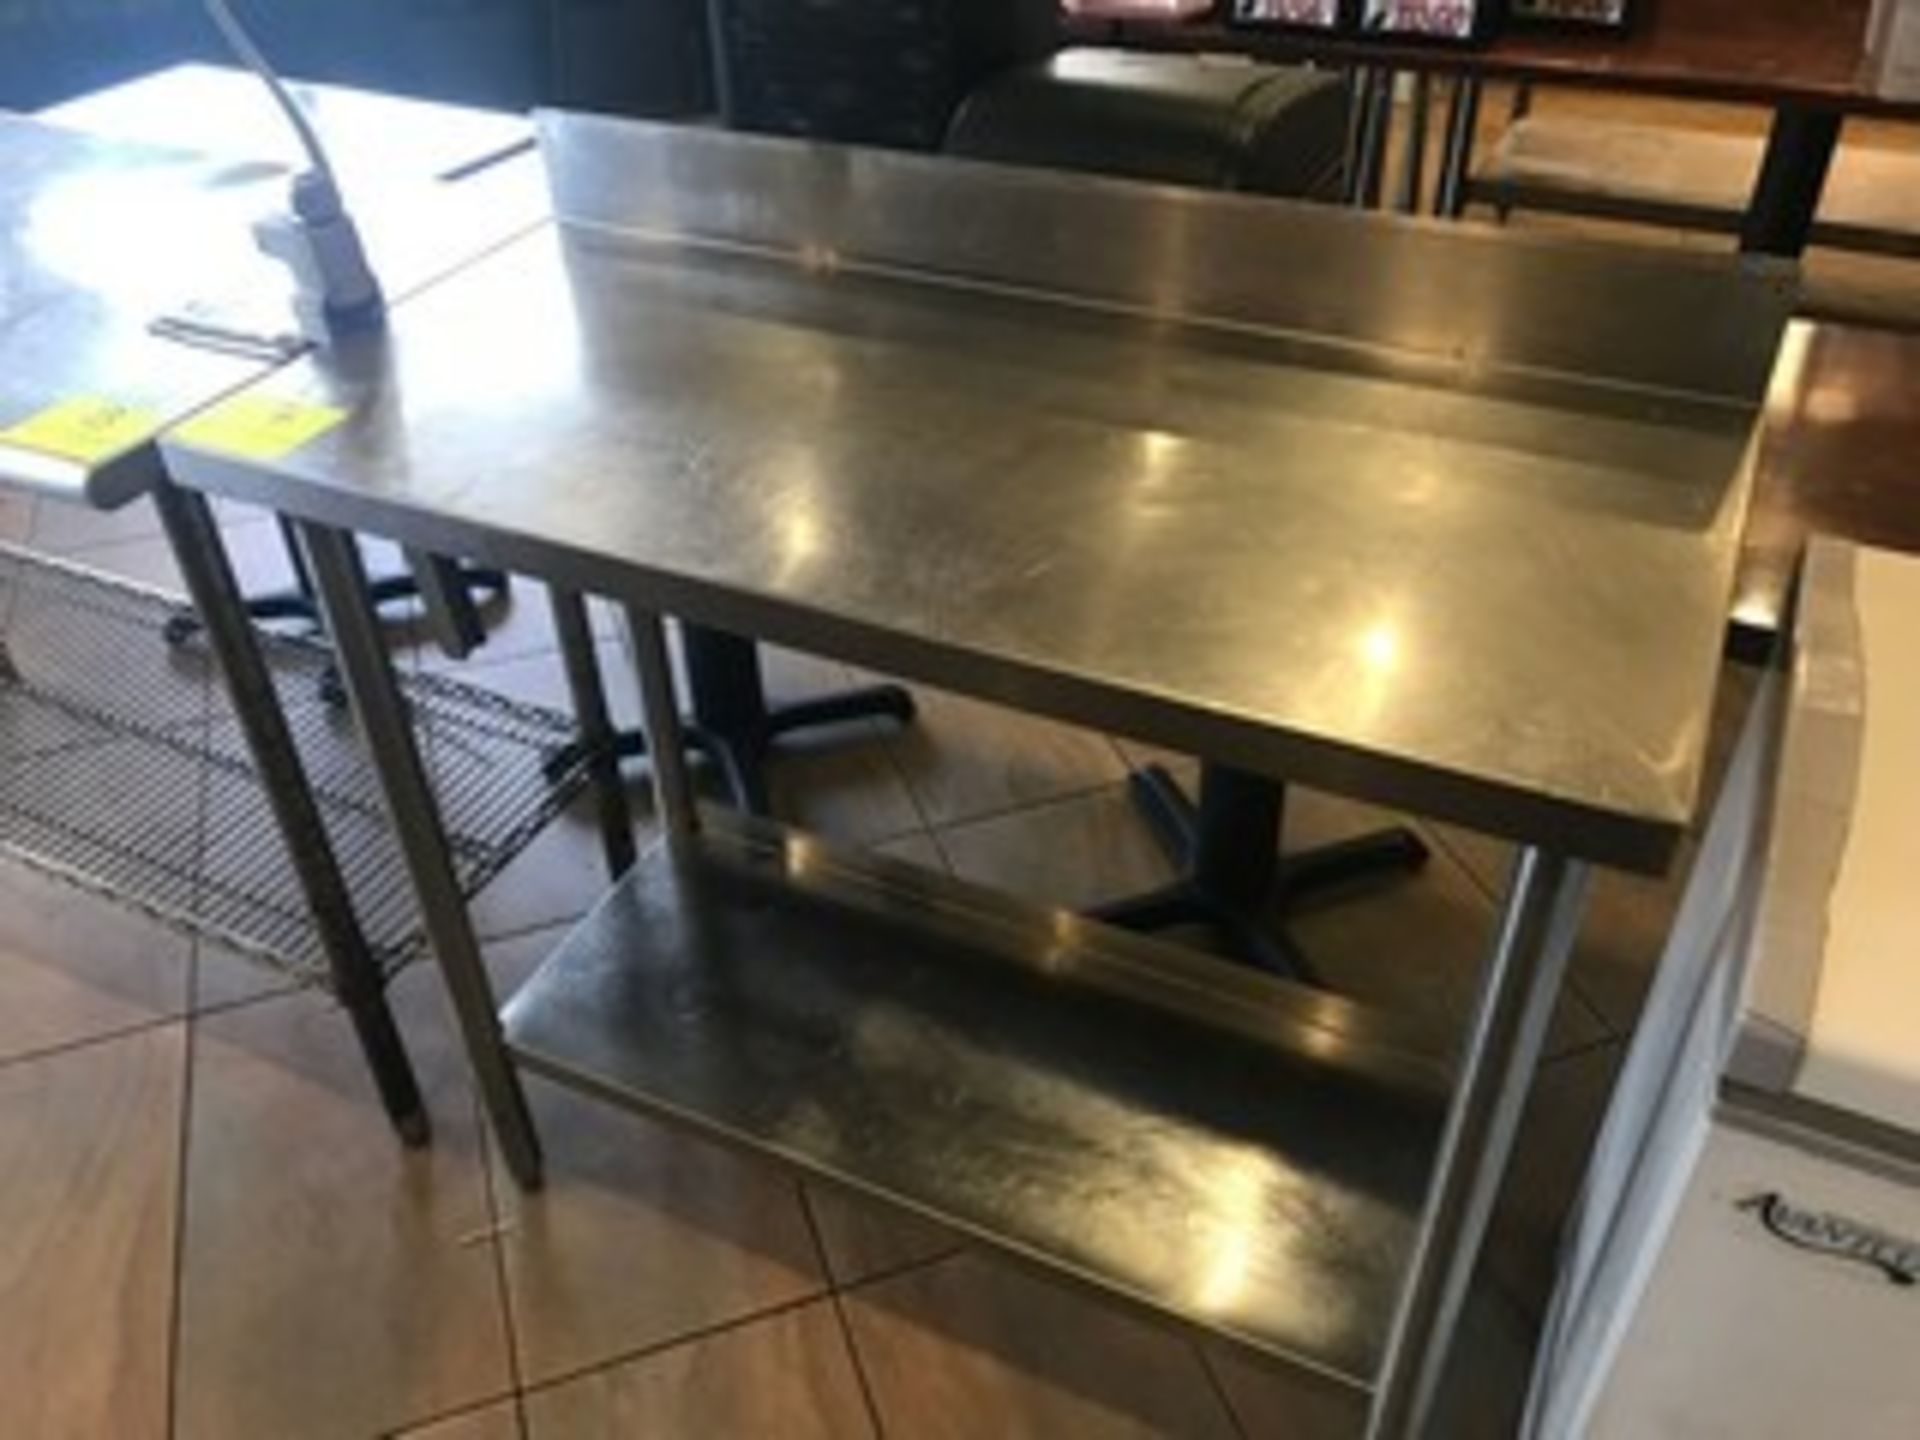 STAINLESS STEEL TABLE WITH BACKSPLASH & STAINLESS STEEL LOWER SHELF - 40'' WIDE x 18'' DEEP